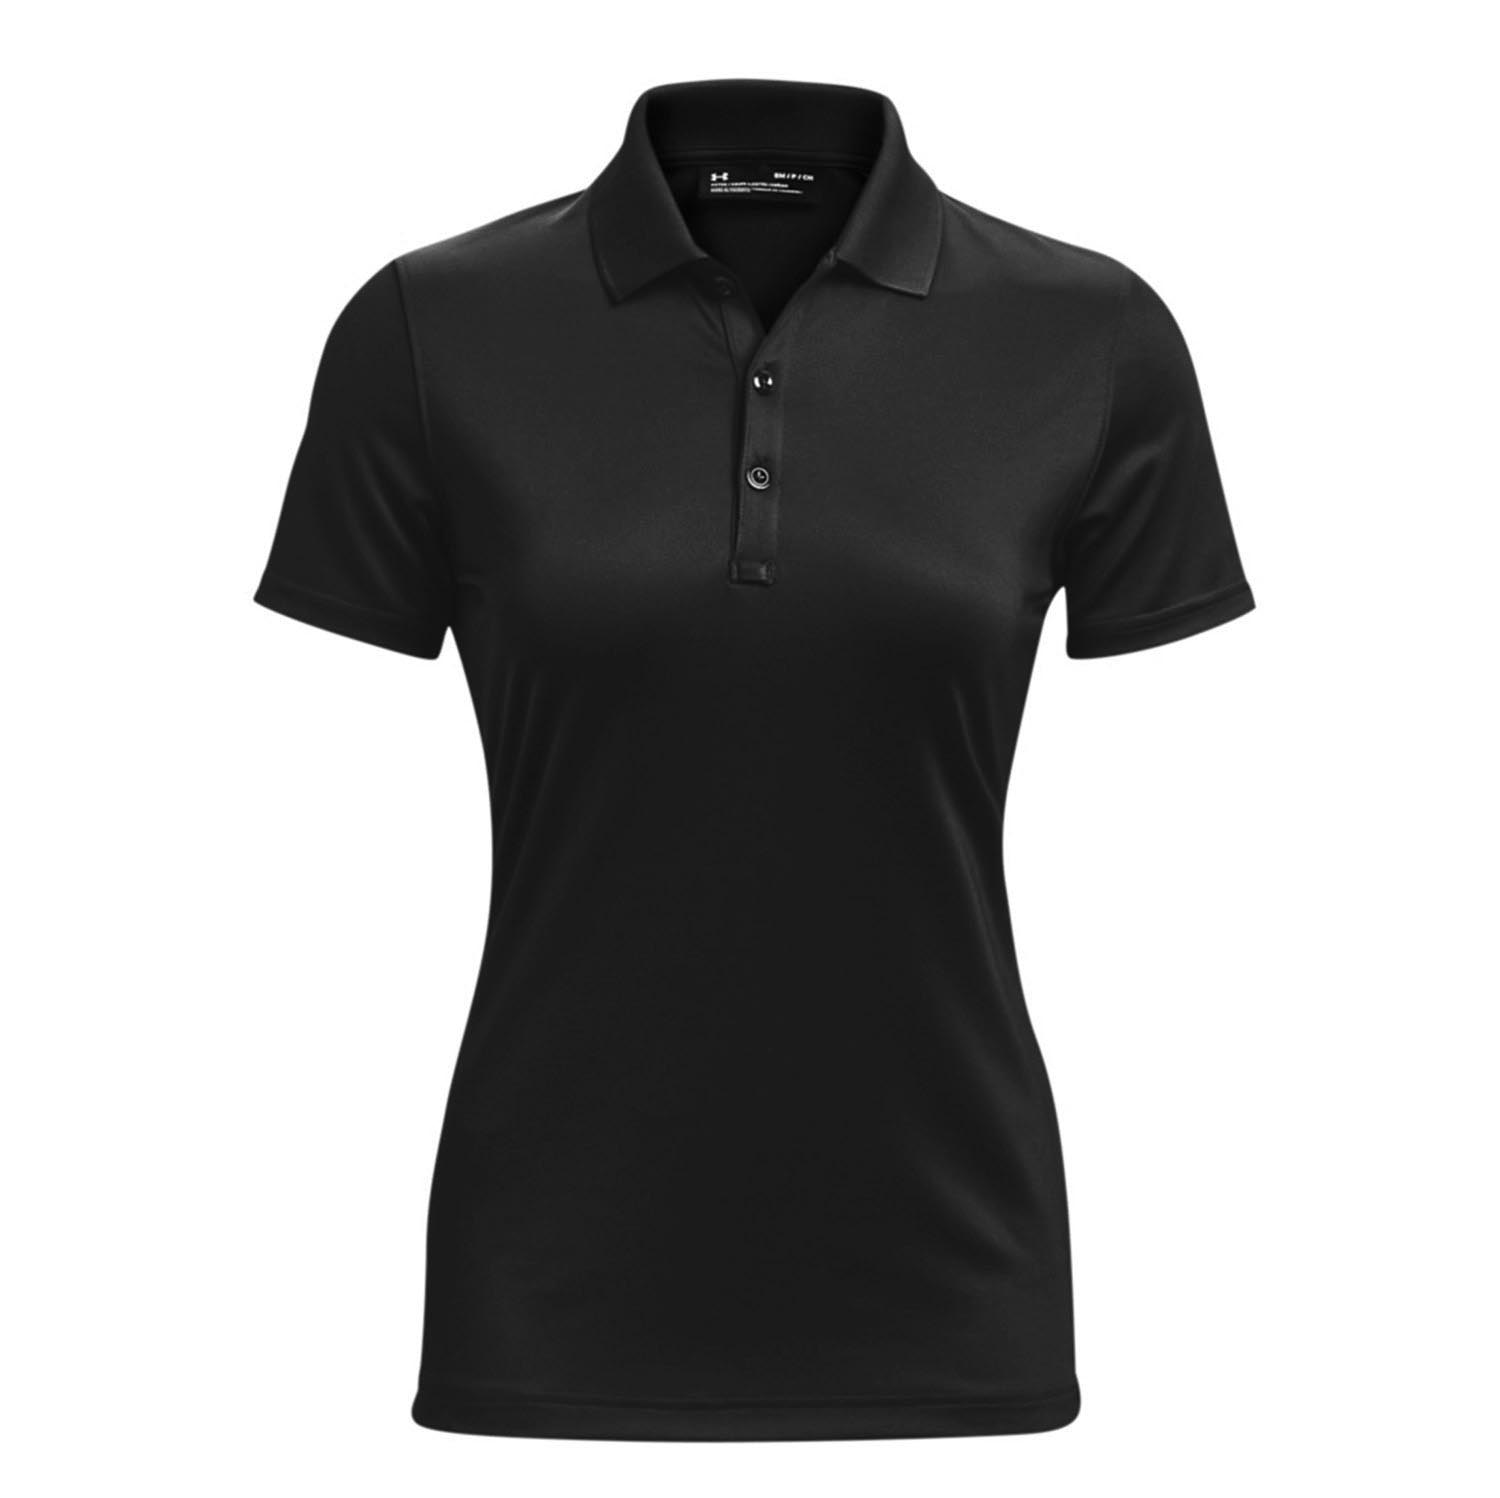 UNDER ARMOUR WOMEN'S TACTICAL PERFORMANCE RANGE POLO 2.0